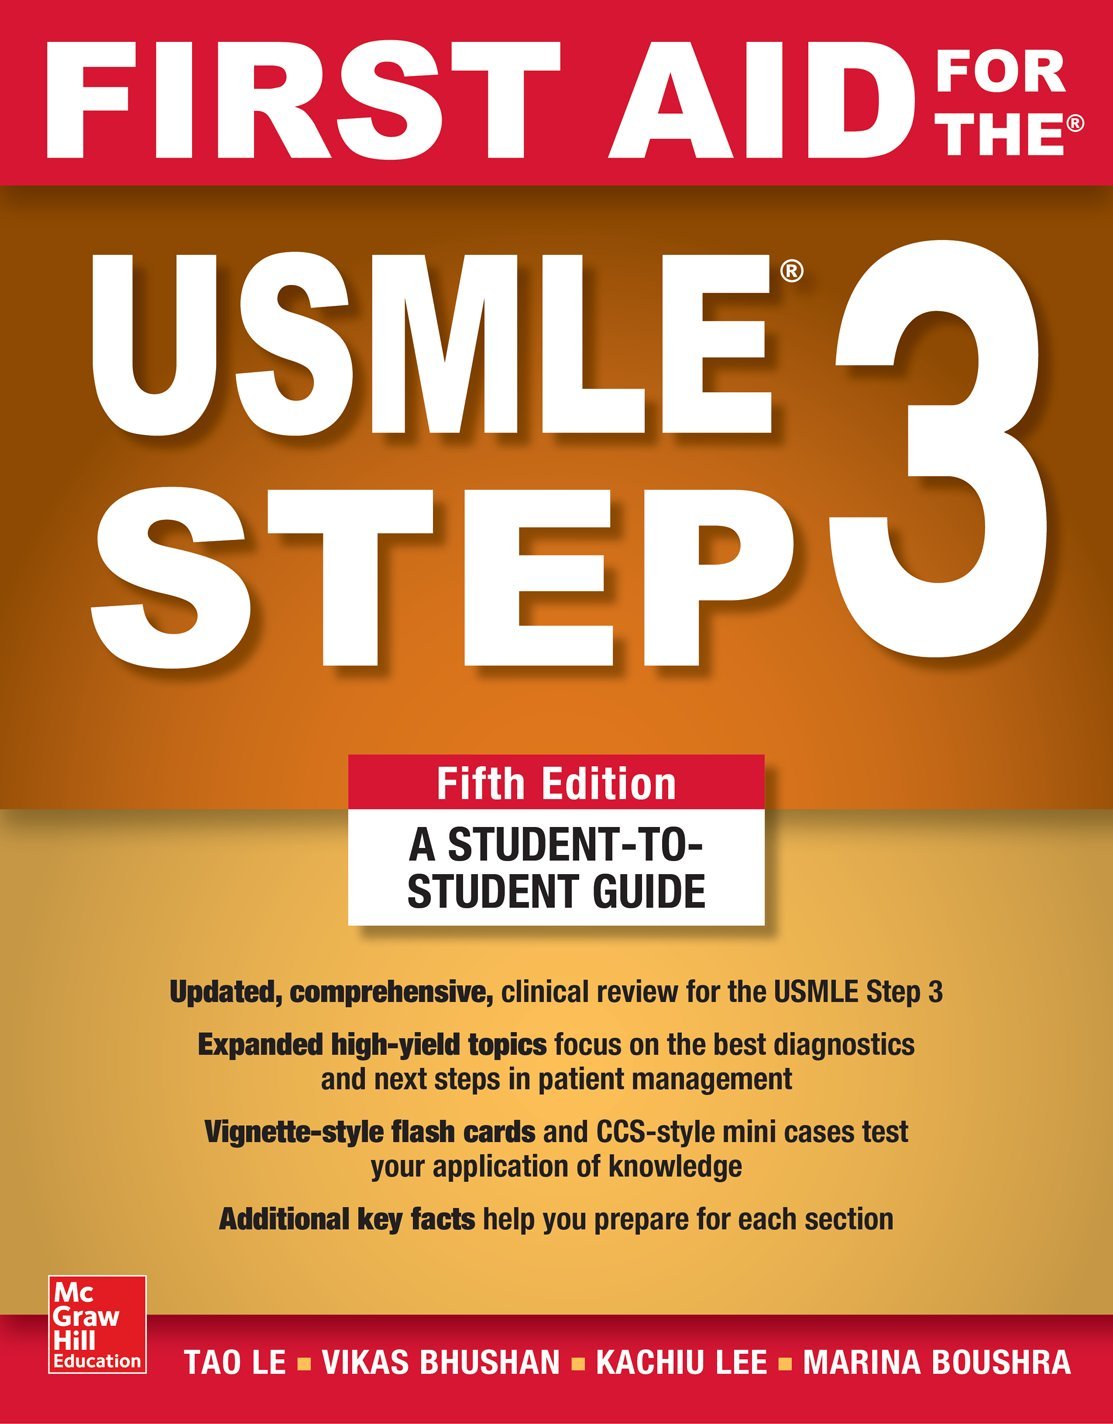 First Aid for the USMLE Step 3, 5th edition